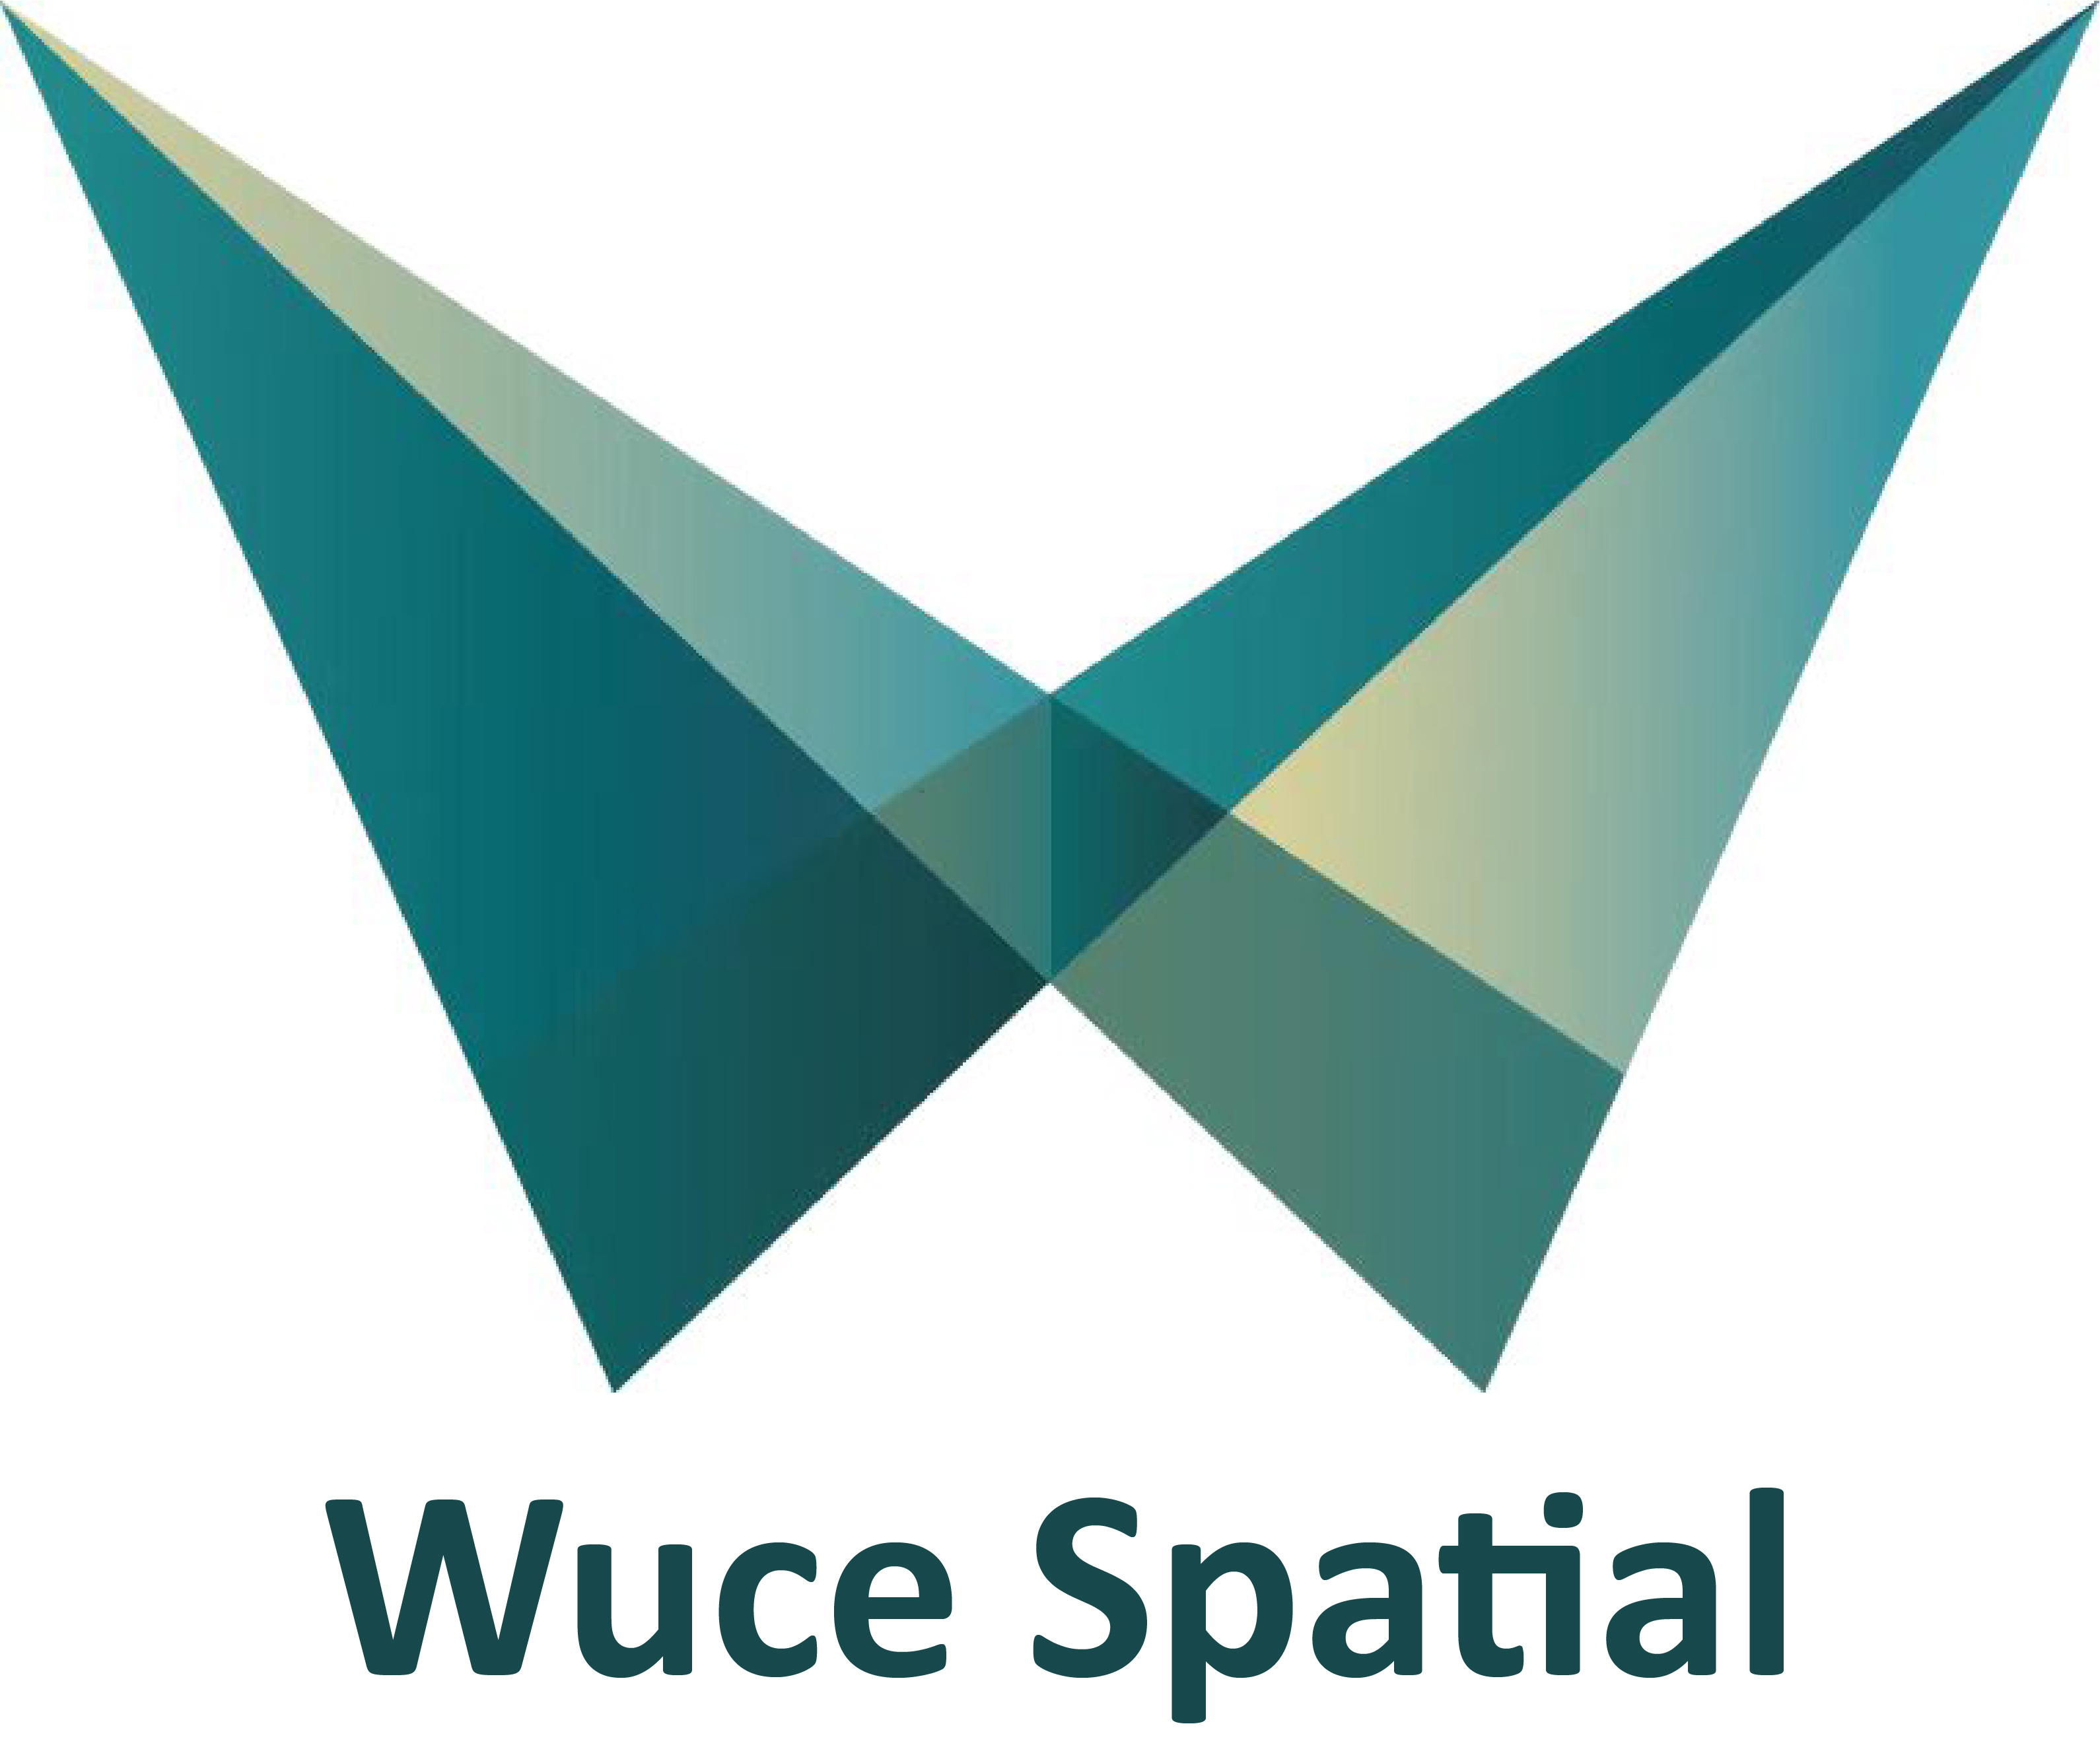 Wuce Spatial